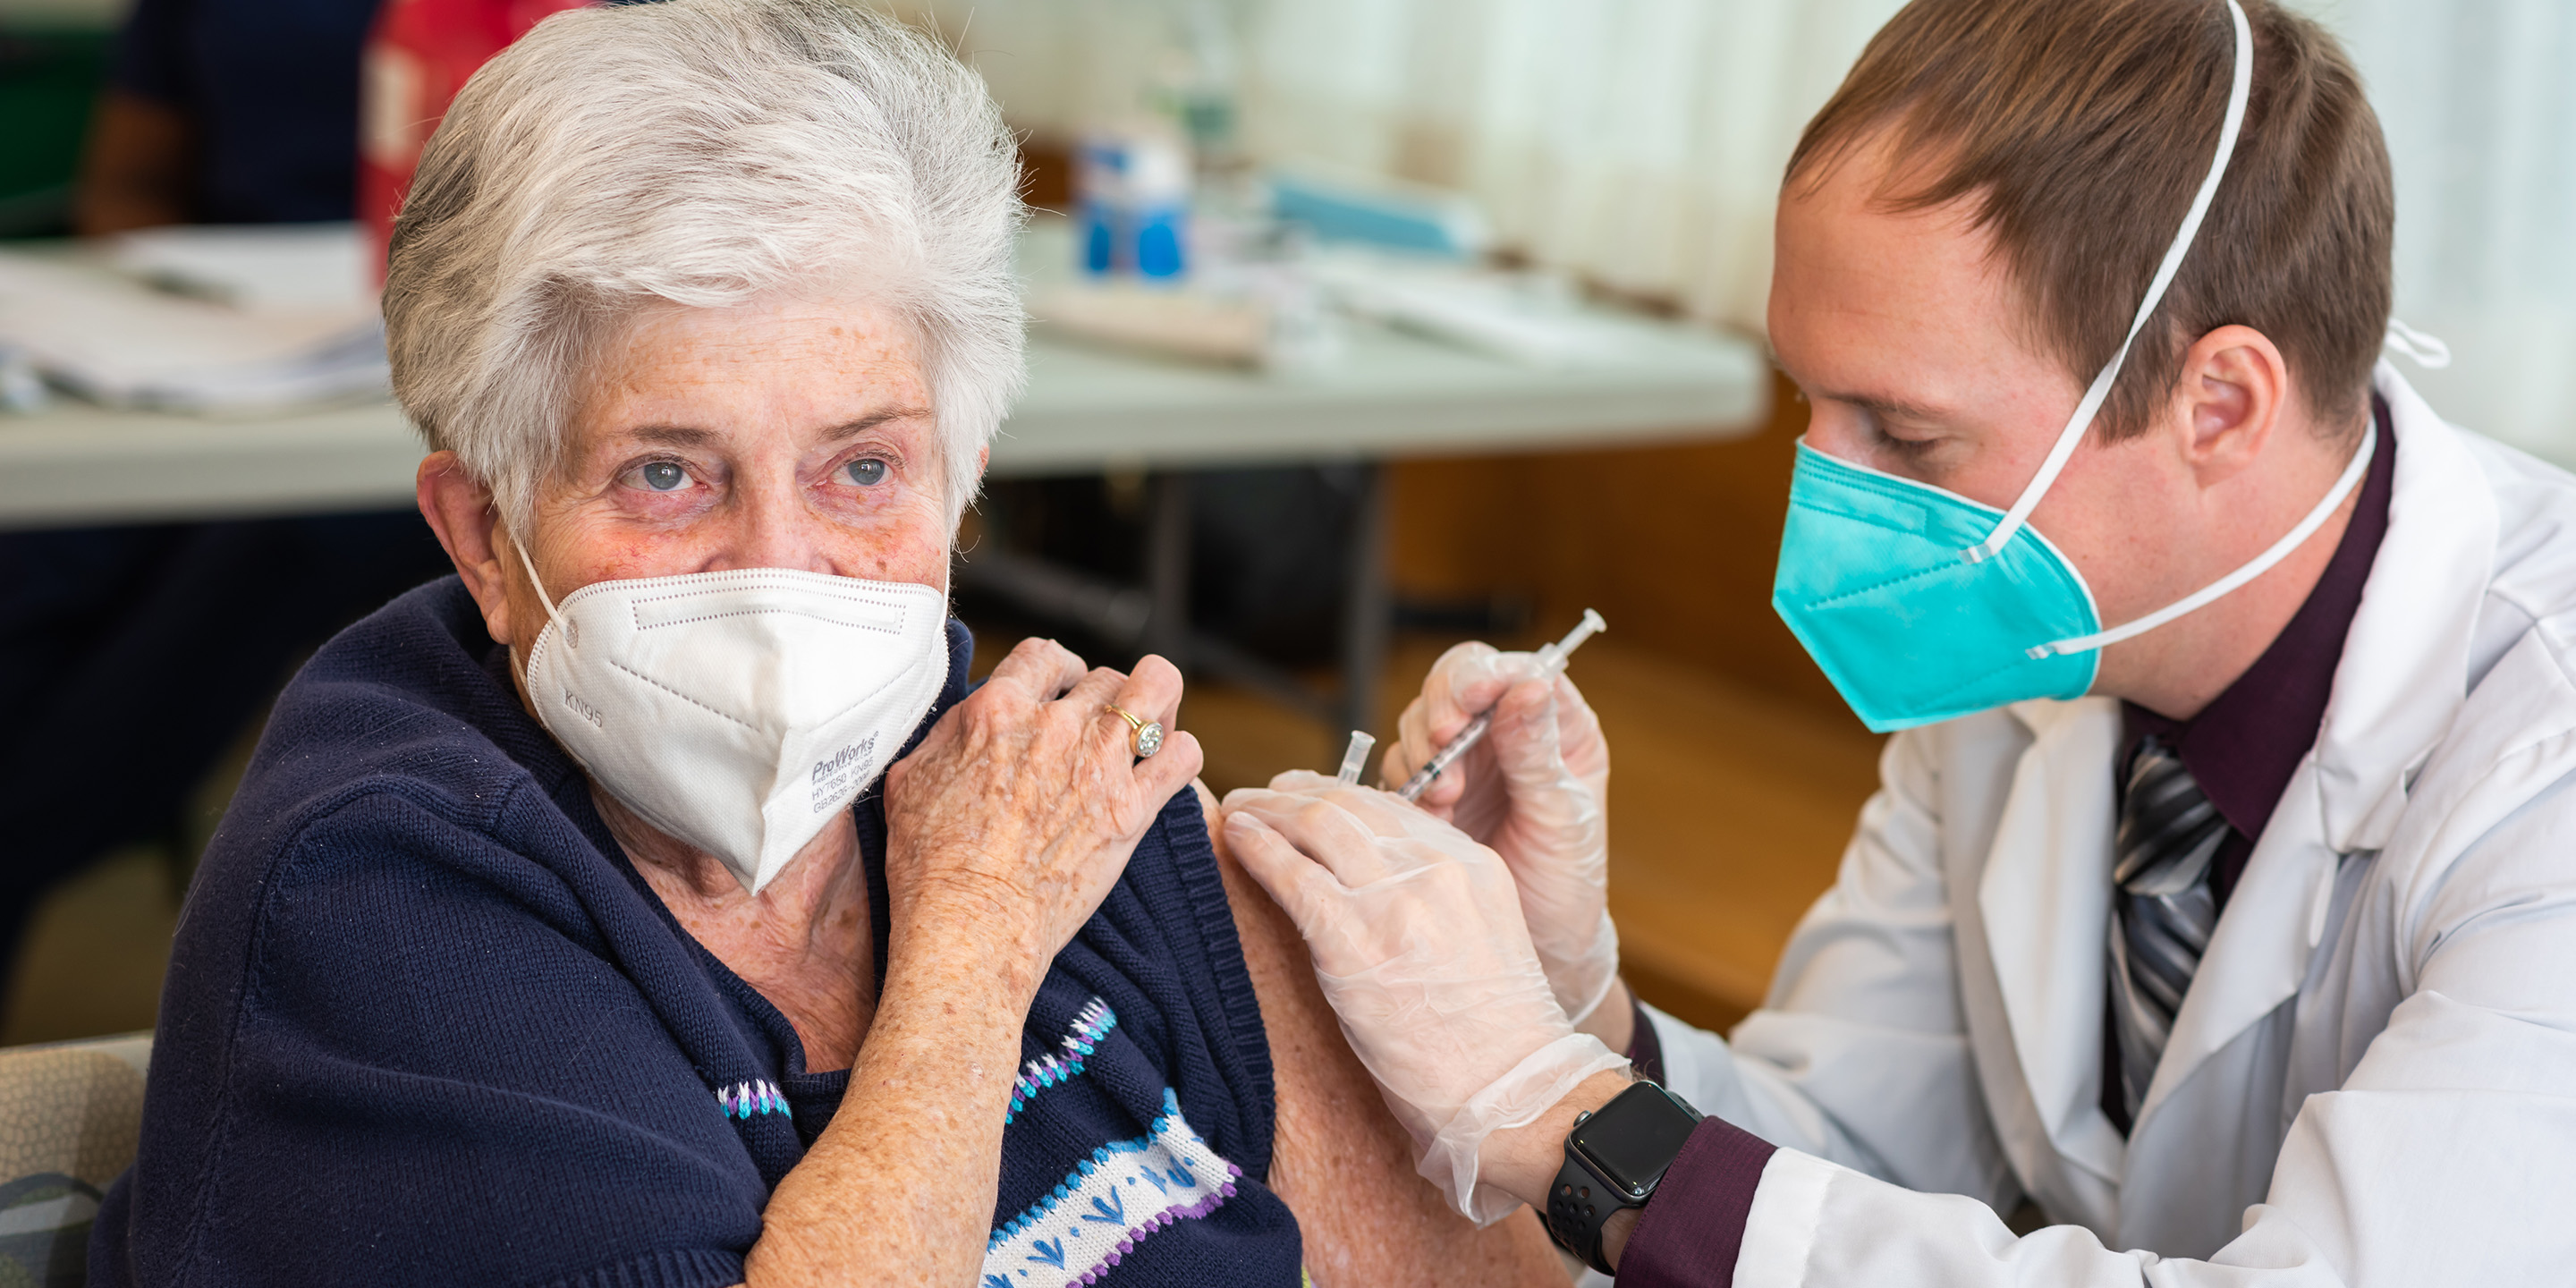 Woman in a blue shirt wearing a mask receives COVID-19 vaccine administered by man with a tie and labcoat.